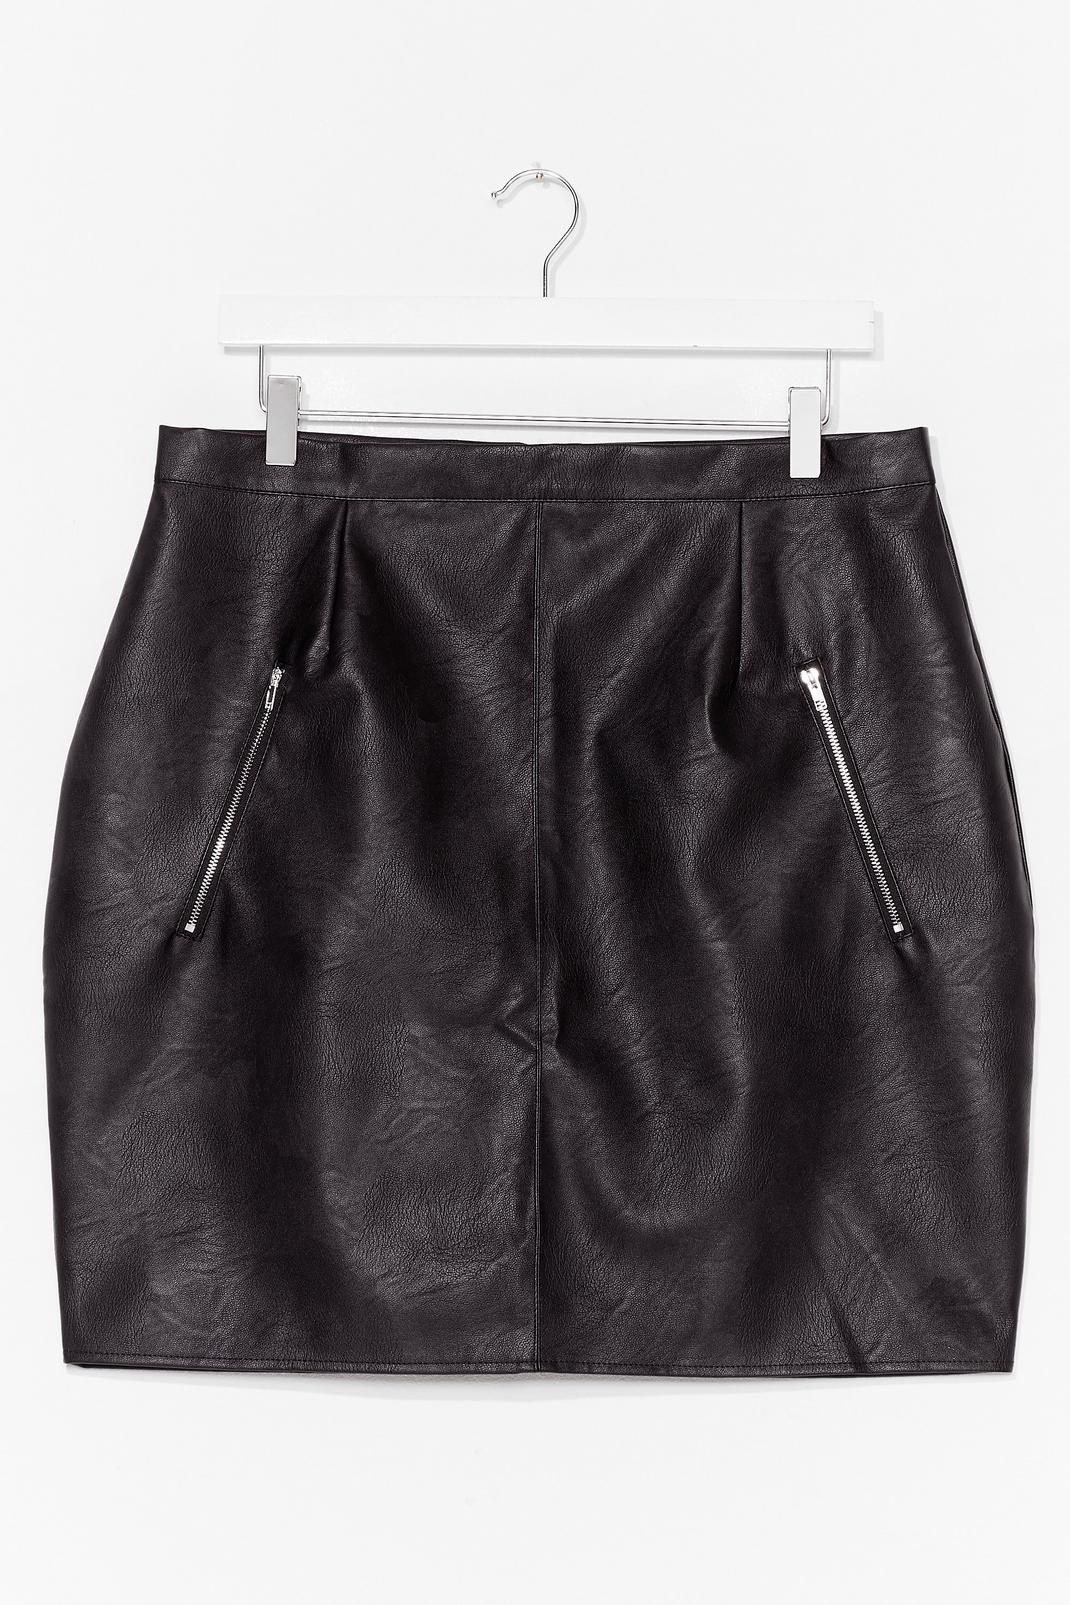 Zip's Now or Never Plus Faux Leather Mini Skirt | Nasty Gal